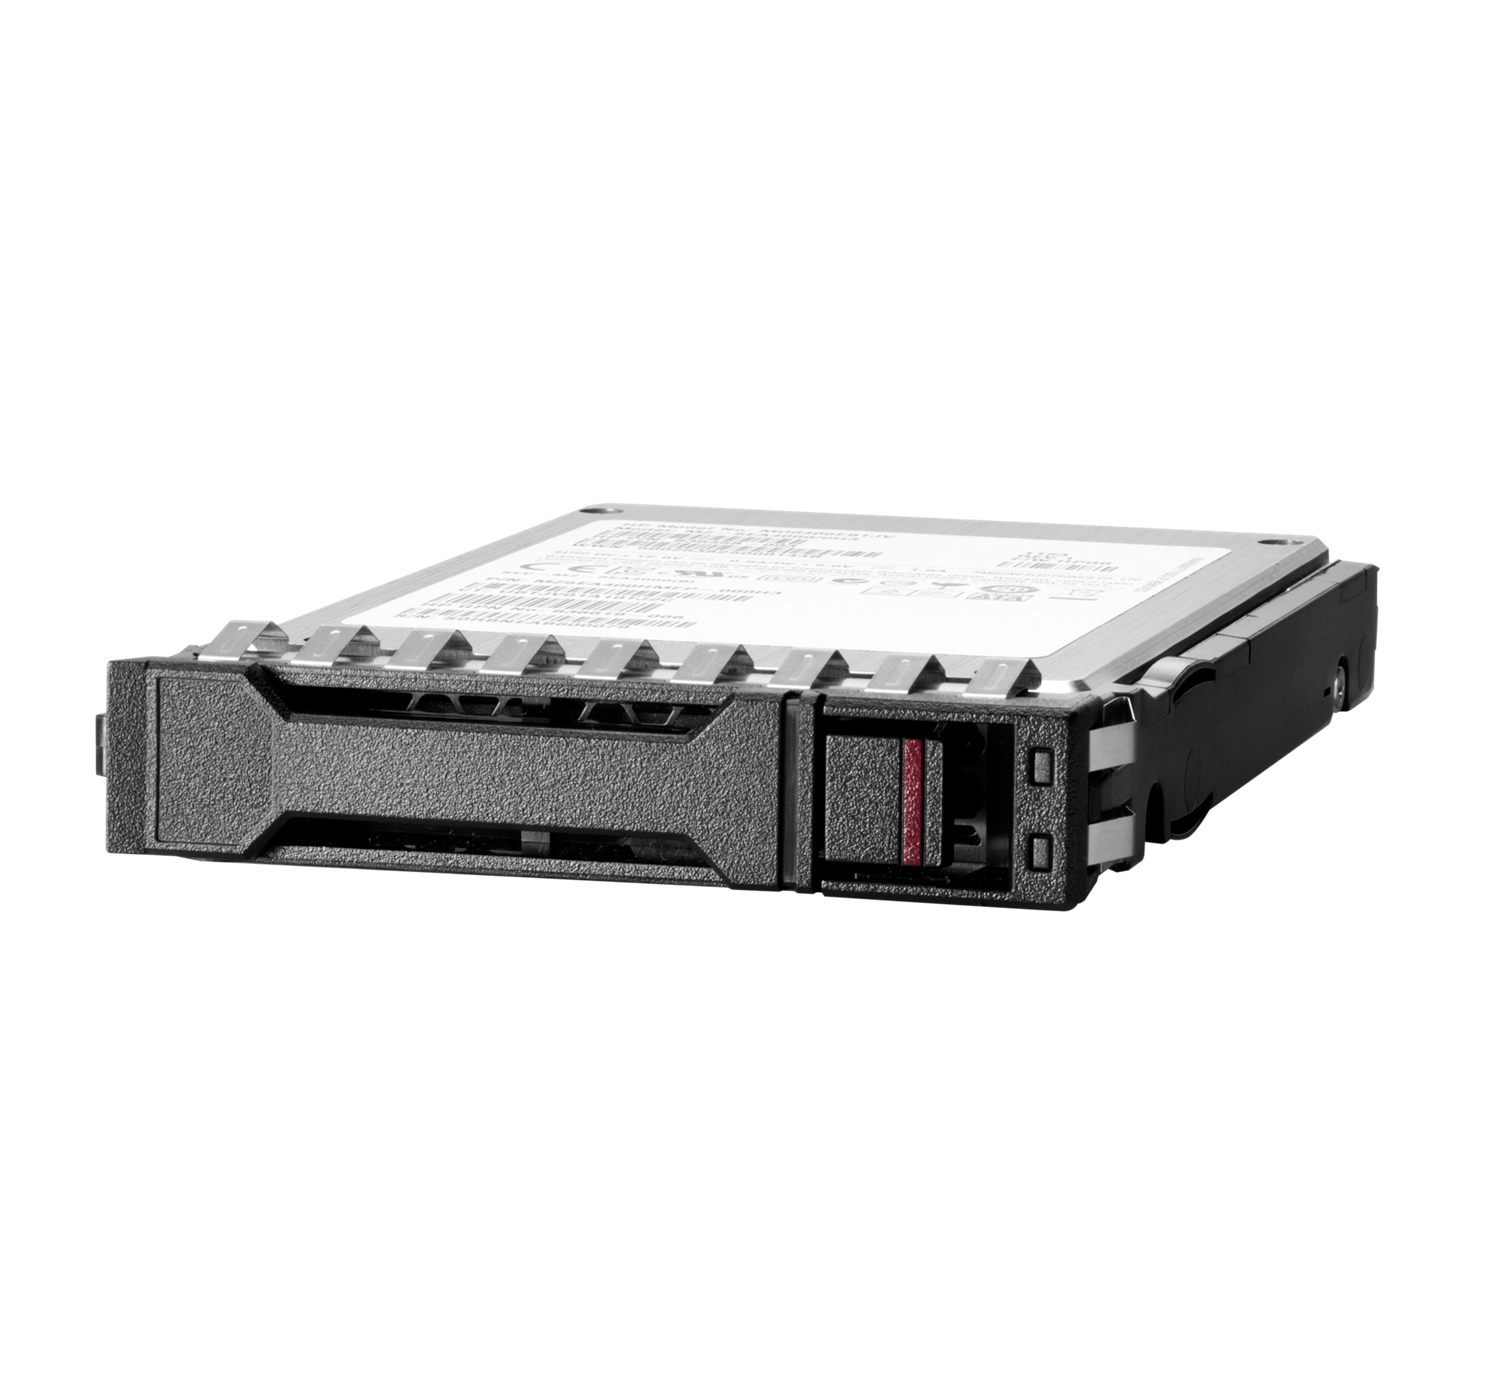 HPE Very Read Optimized - SSD - 7.68 TB - Hot-Swap - 2.5" SFF (6.4 cm SFF)